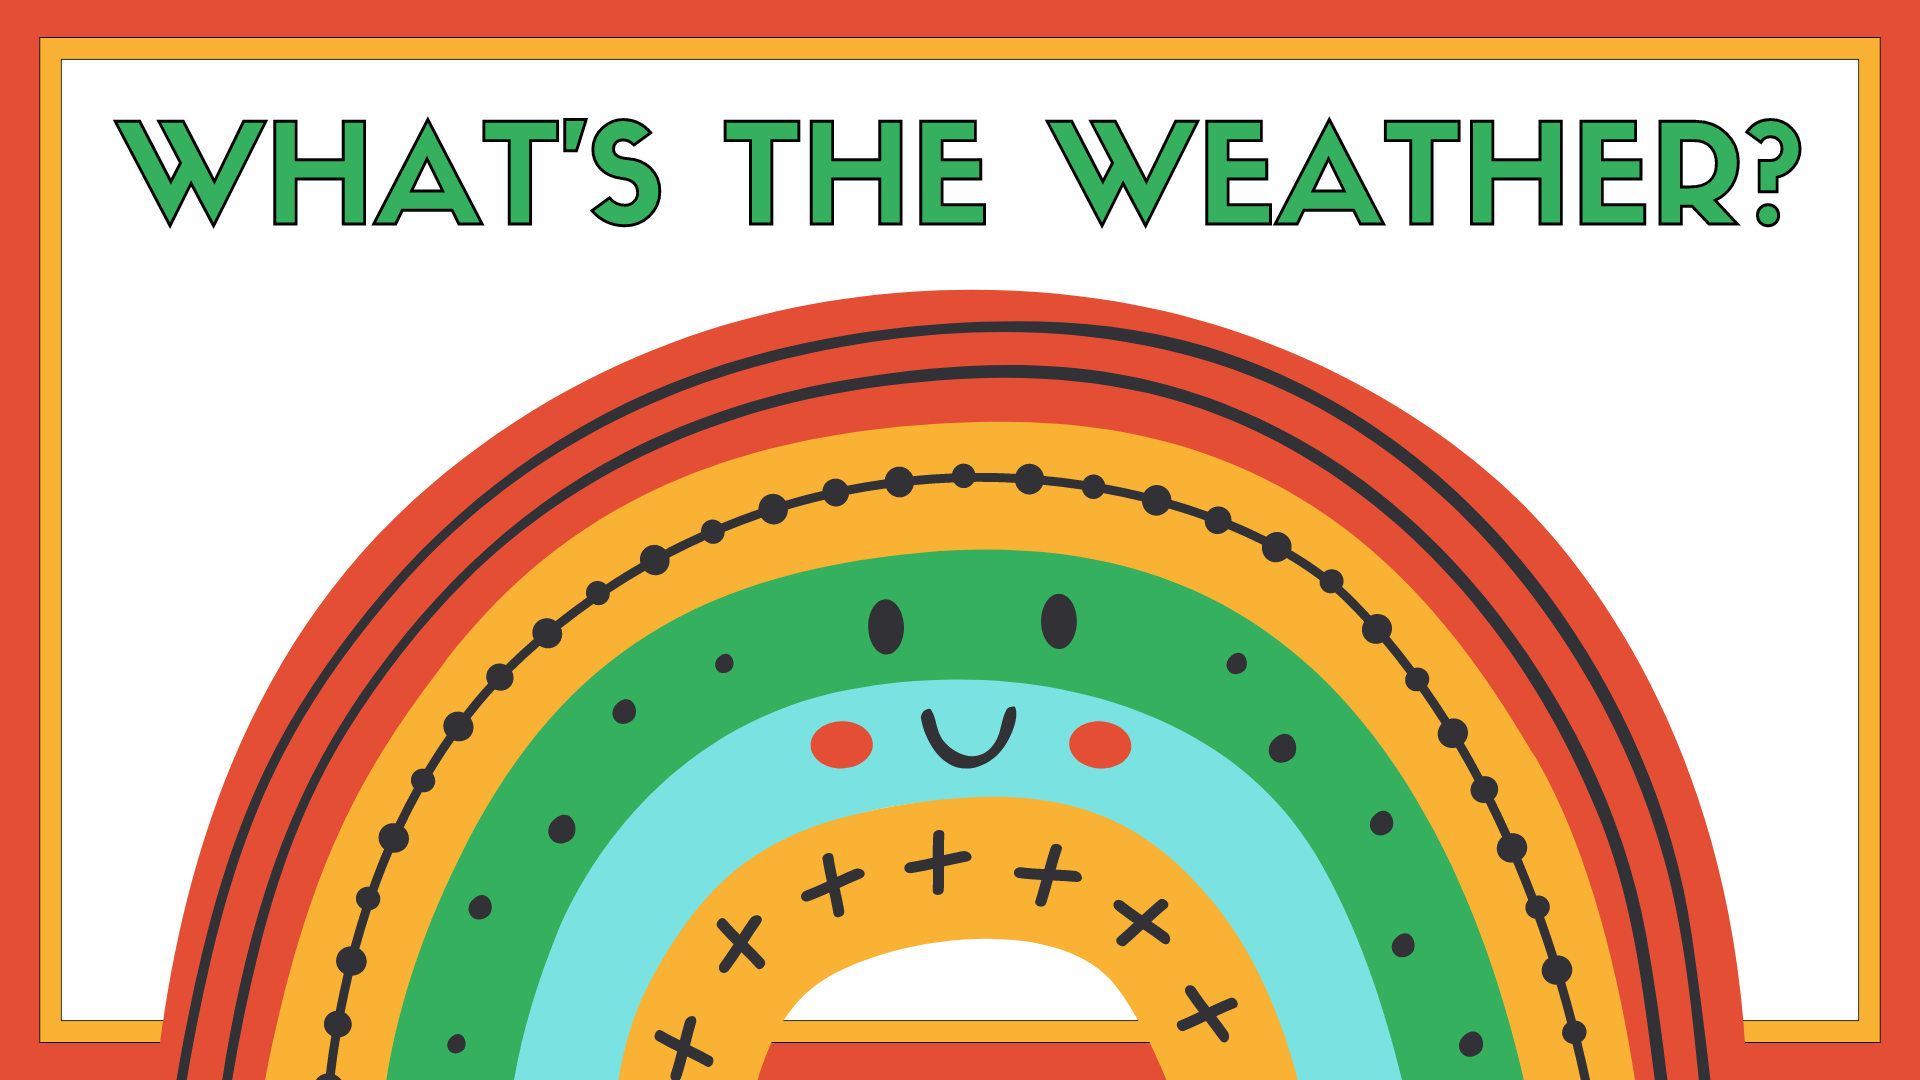 What's the weather program cover